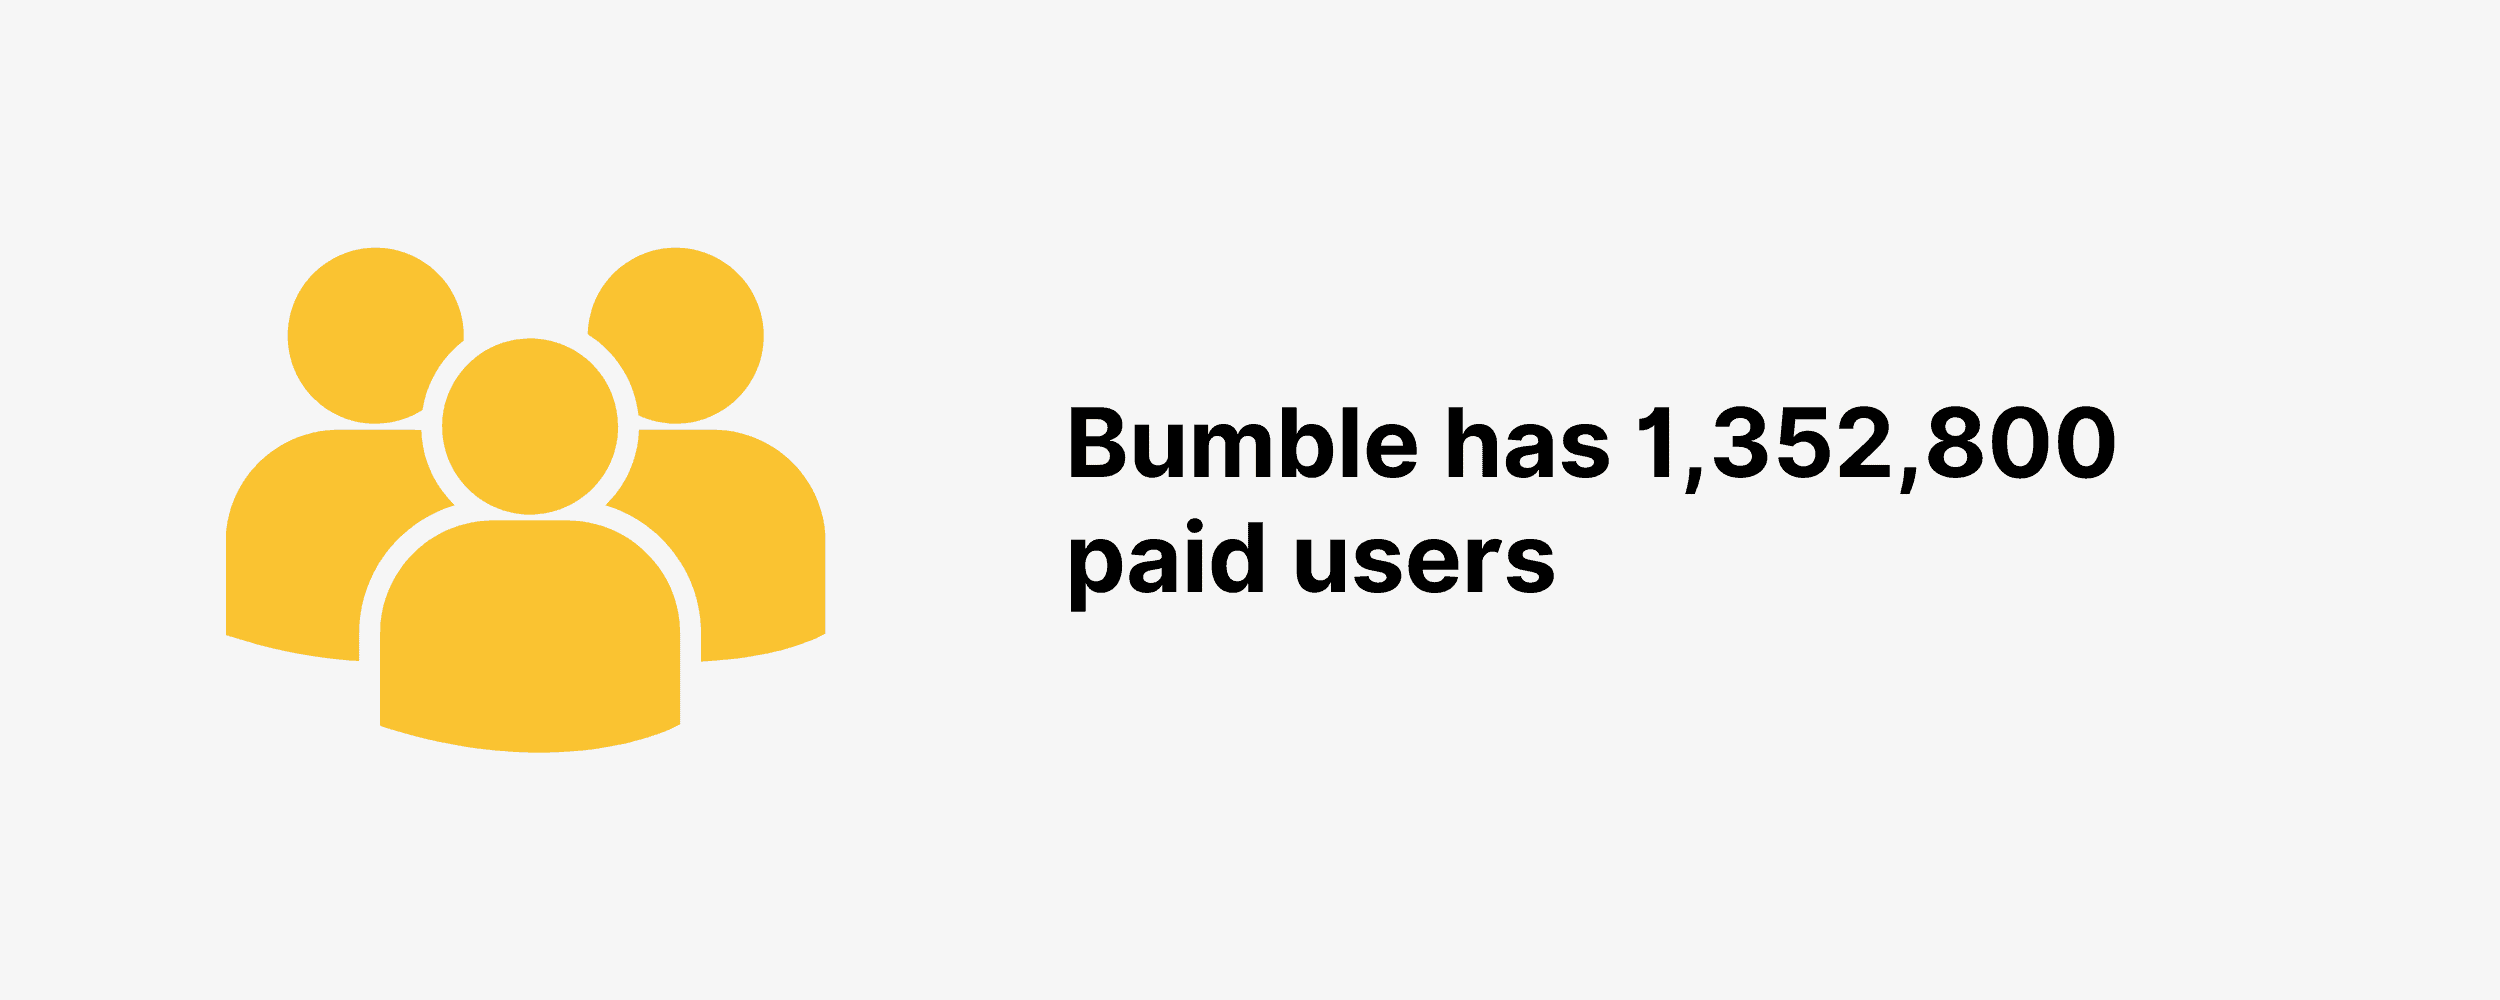 Bumble has 1,352,800 paid users